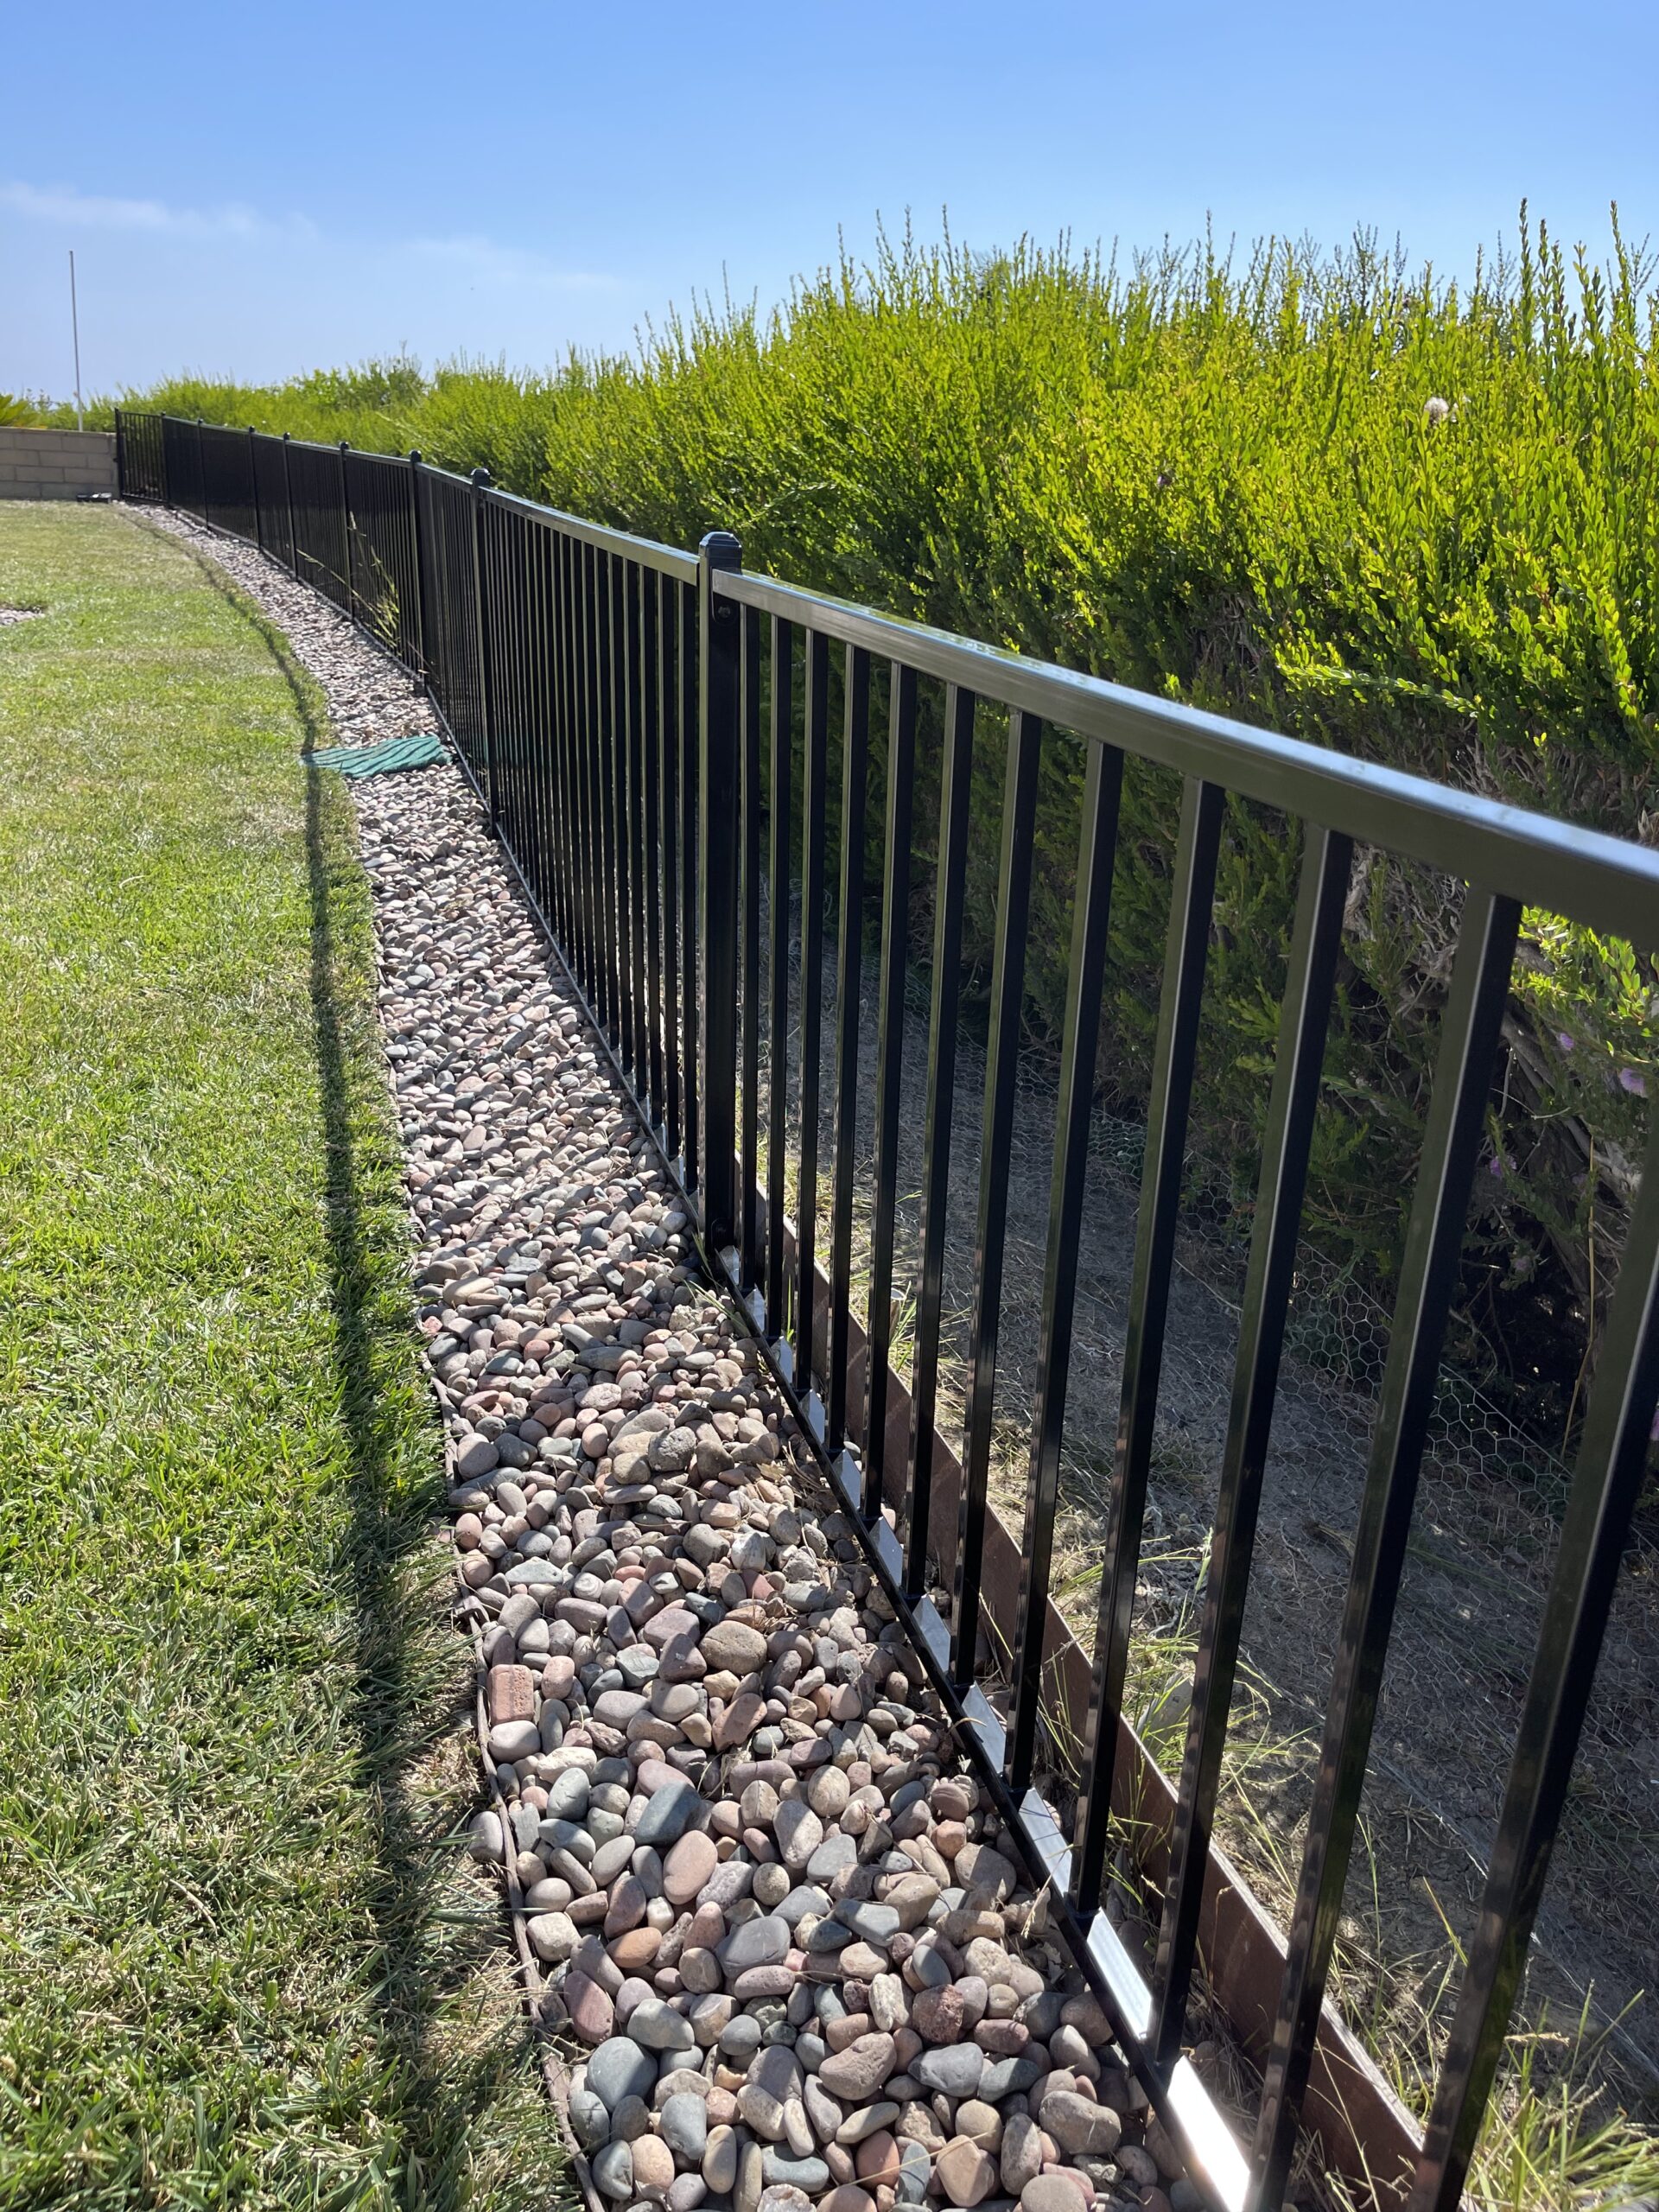 A fence with a stone path leading to the side of it.